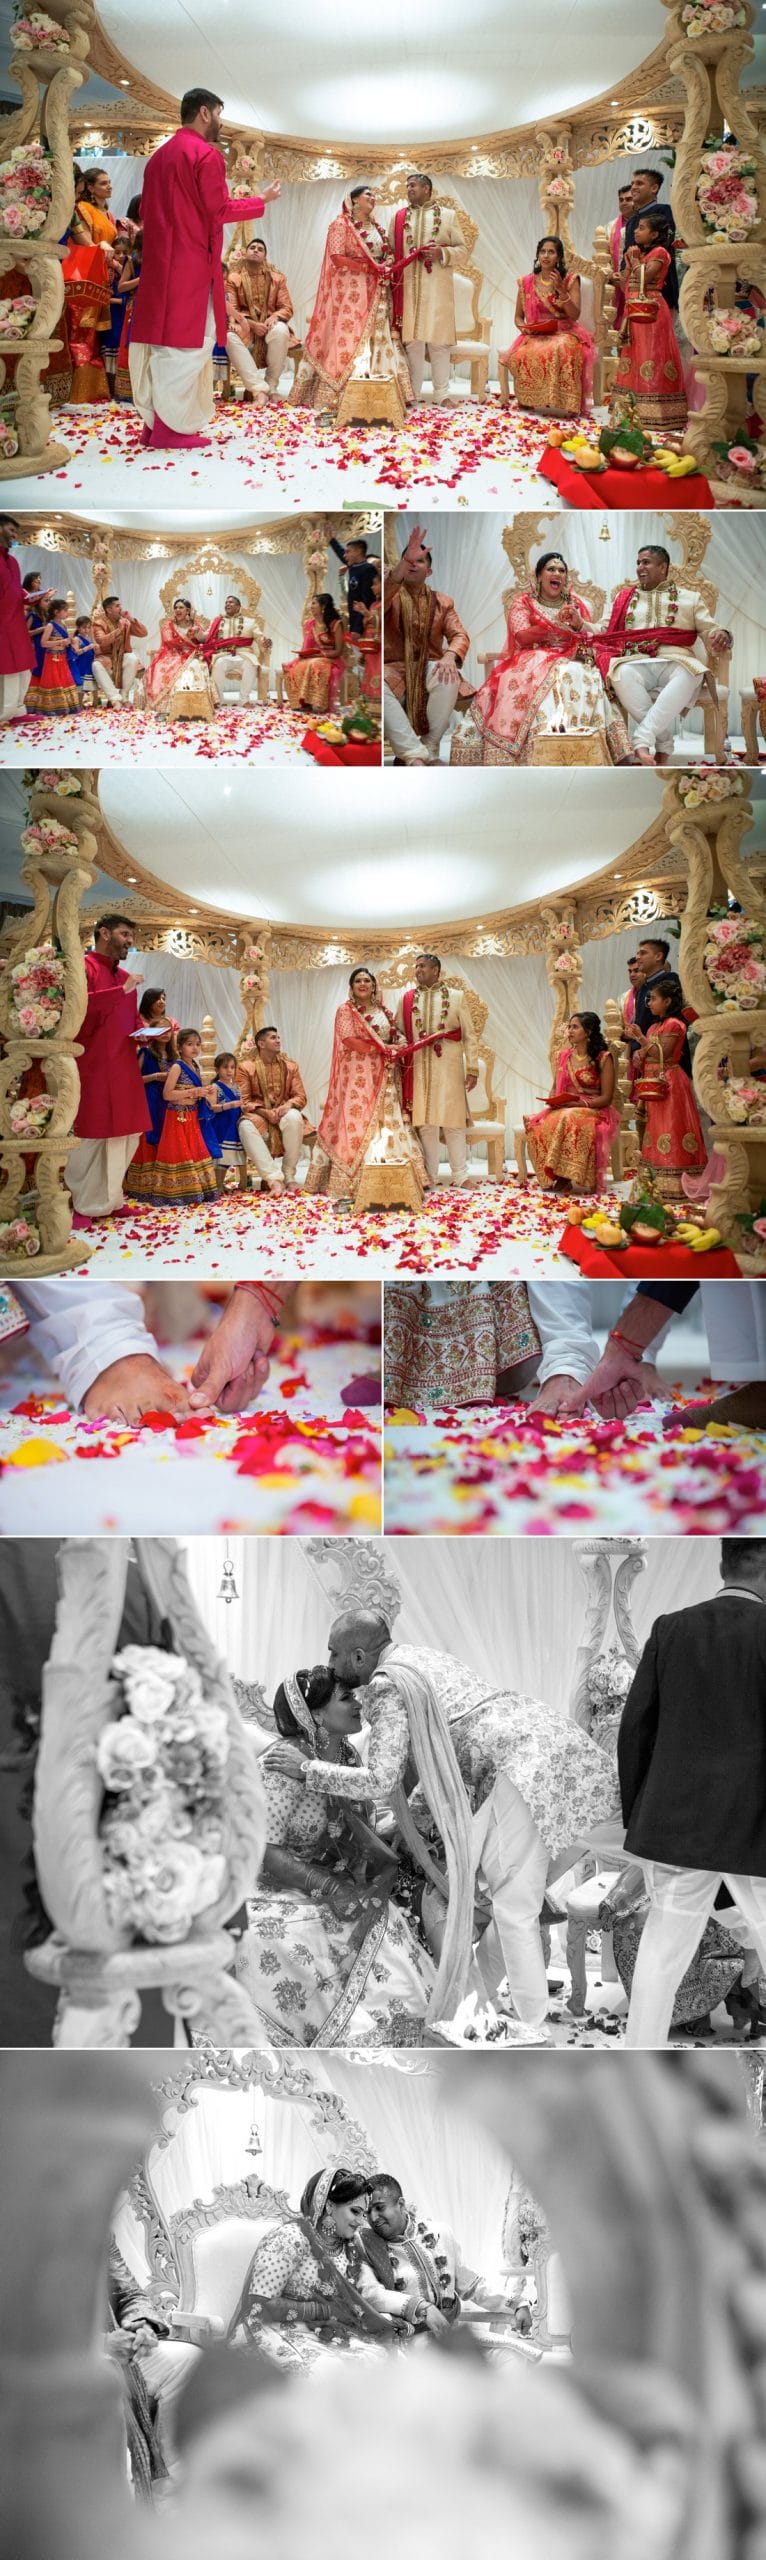 Hindu wedding Photography and Video at the Belfry Hotel 11 scaled